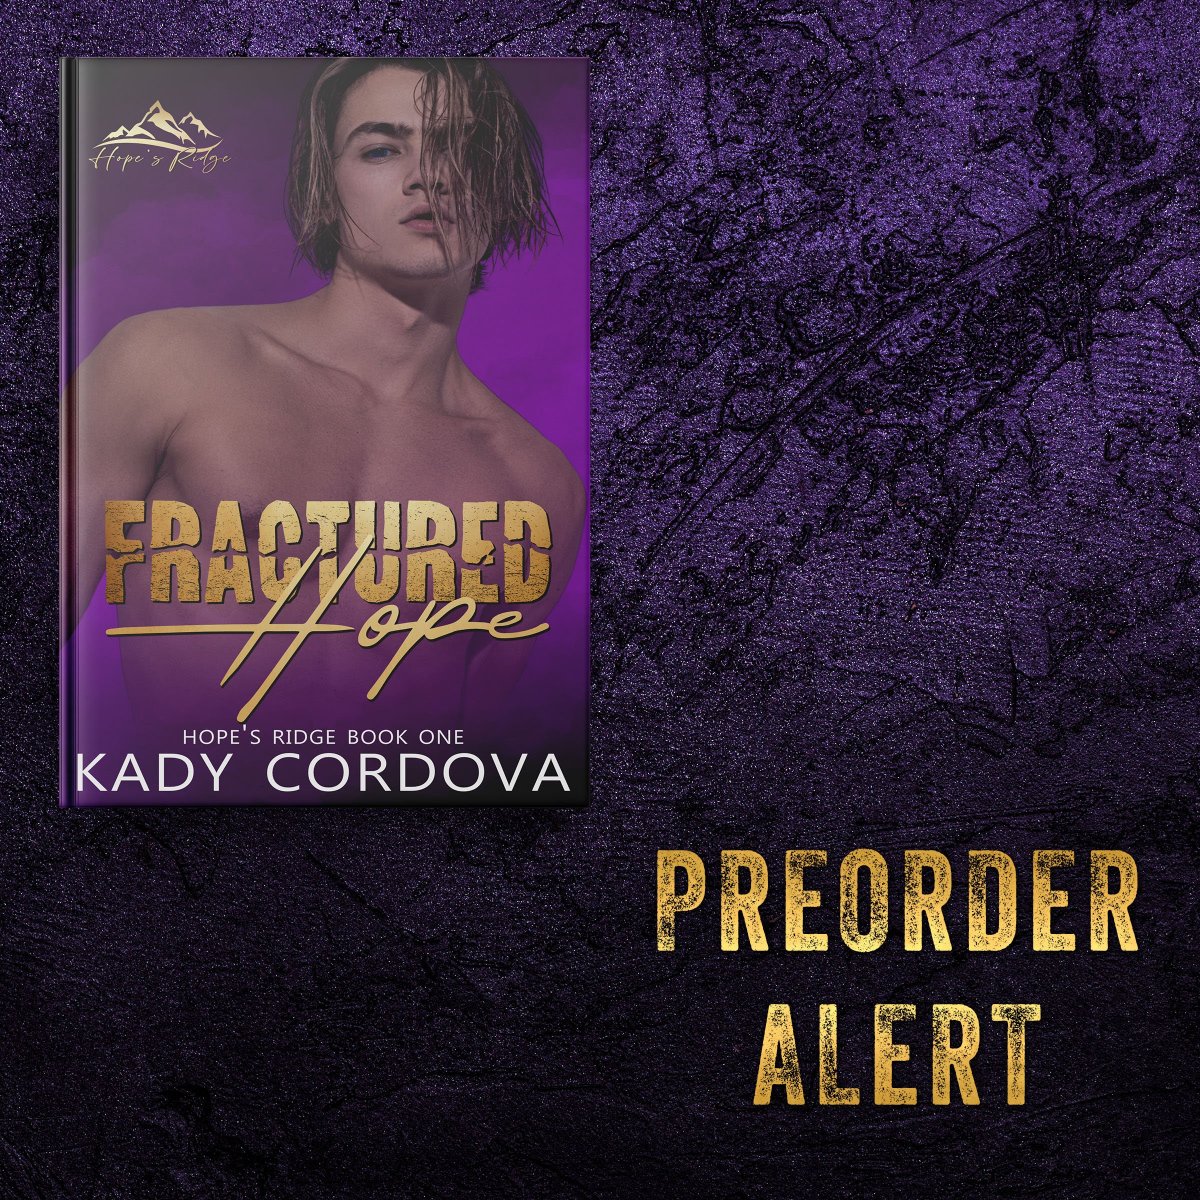 Time to #PreorderNow! Fractured Hope, the debut novel by Kady Cordova is coming 5/30!

#Preorder: geni.us/FracturedHope

#MMContemporaryRomance #HurtComfort #AgeGap #SmallTown @Chaotic_Creativ